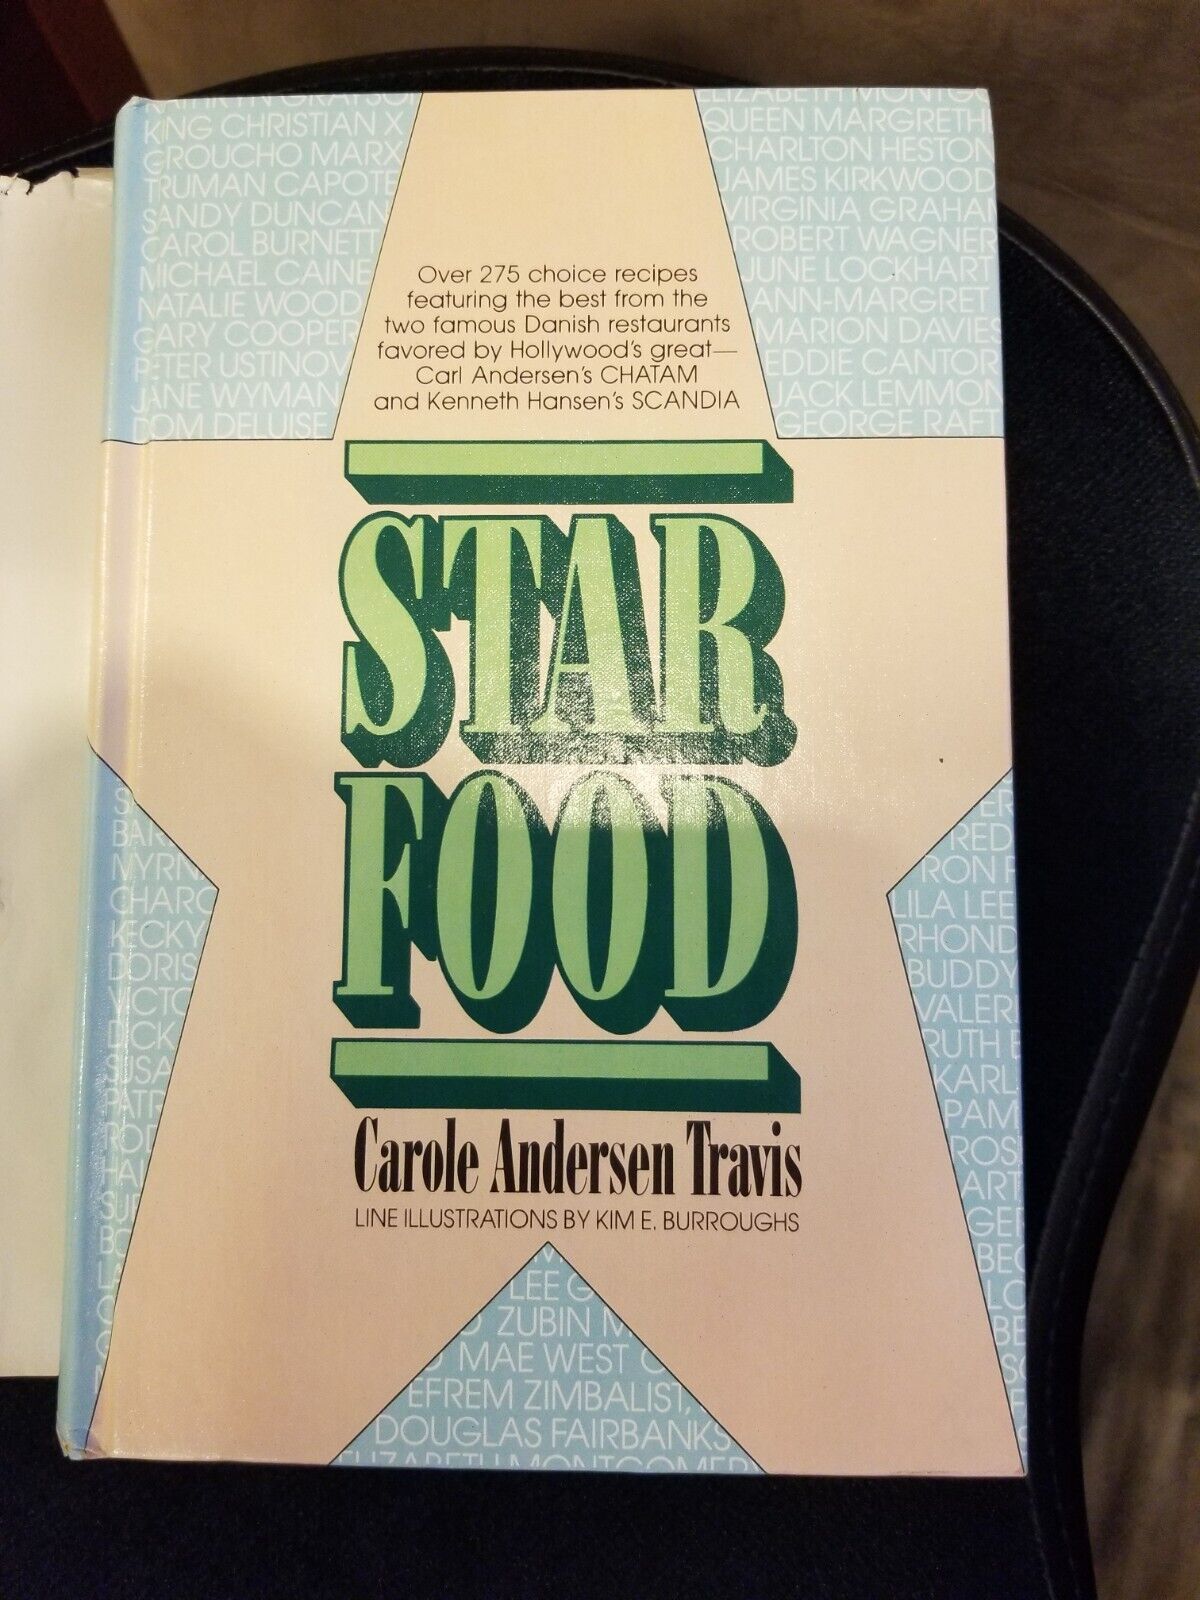 Star Food by Carole Andersen Travis 1981 Hardcover Signed by Author